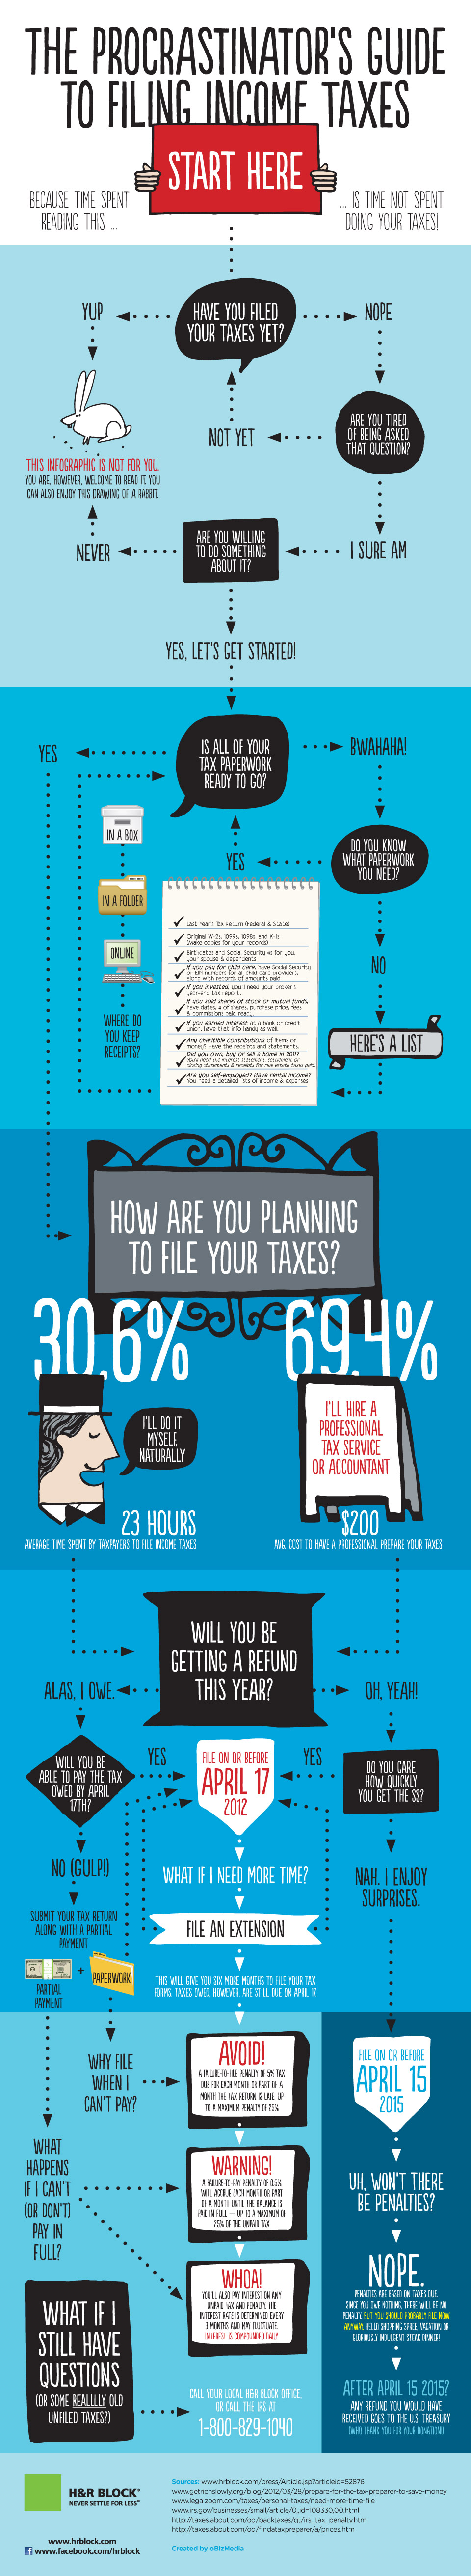 Procrastinator's Guide To Filing Income Taxes Infographic